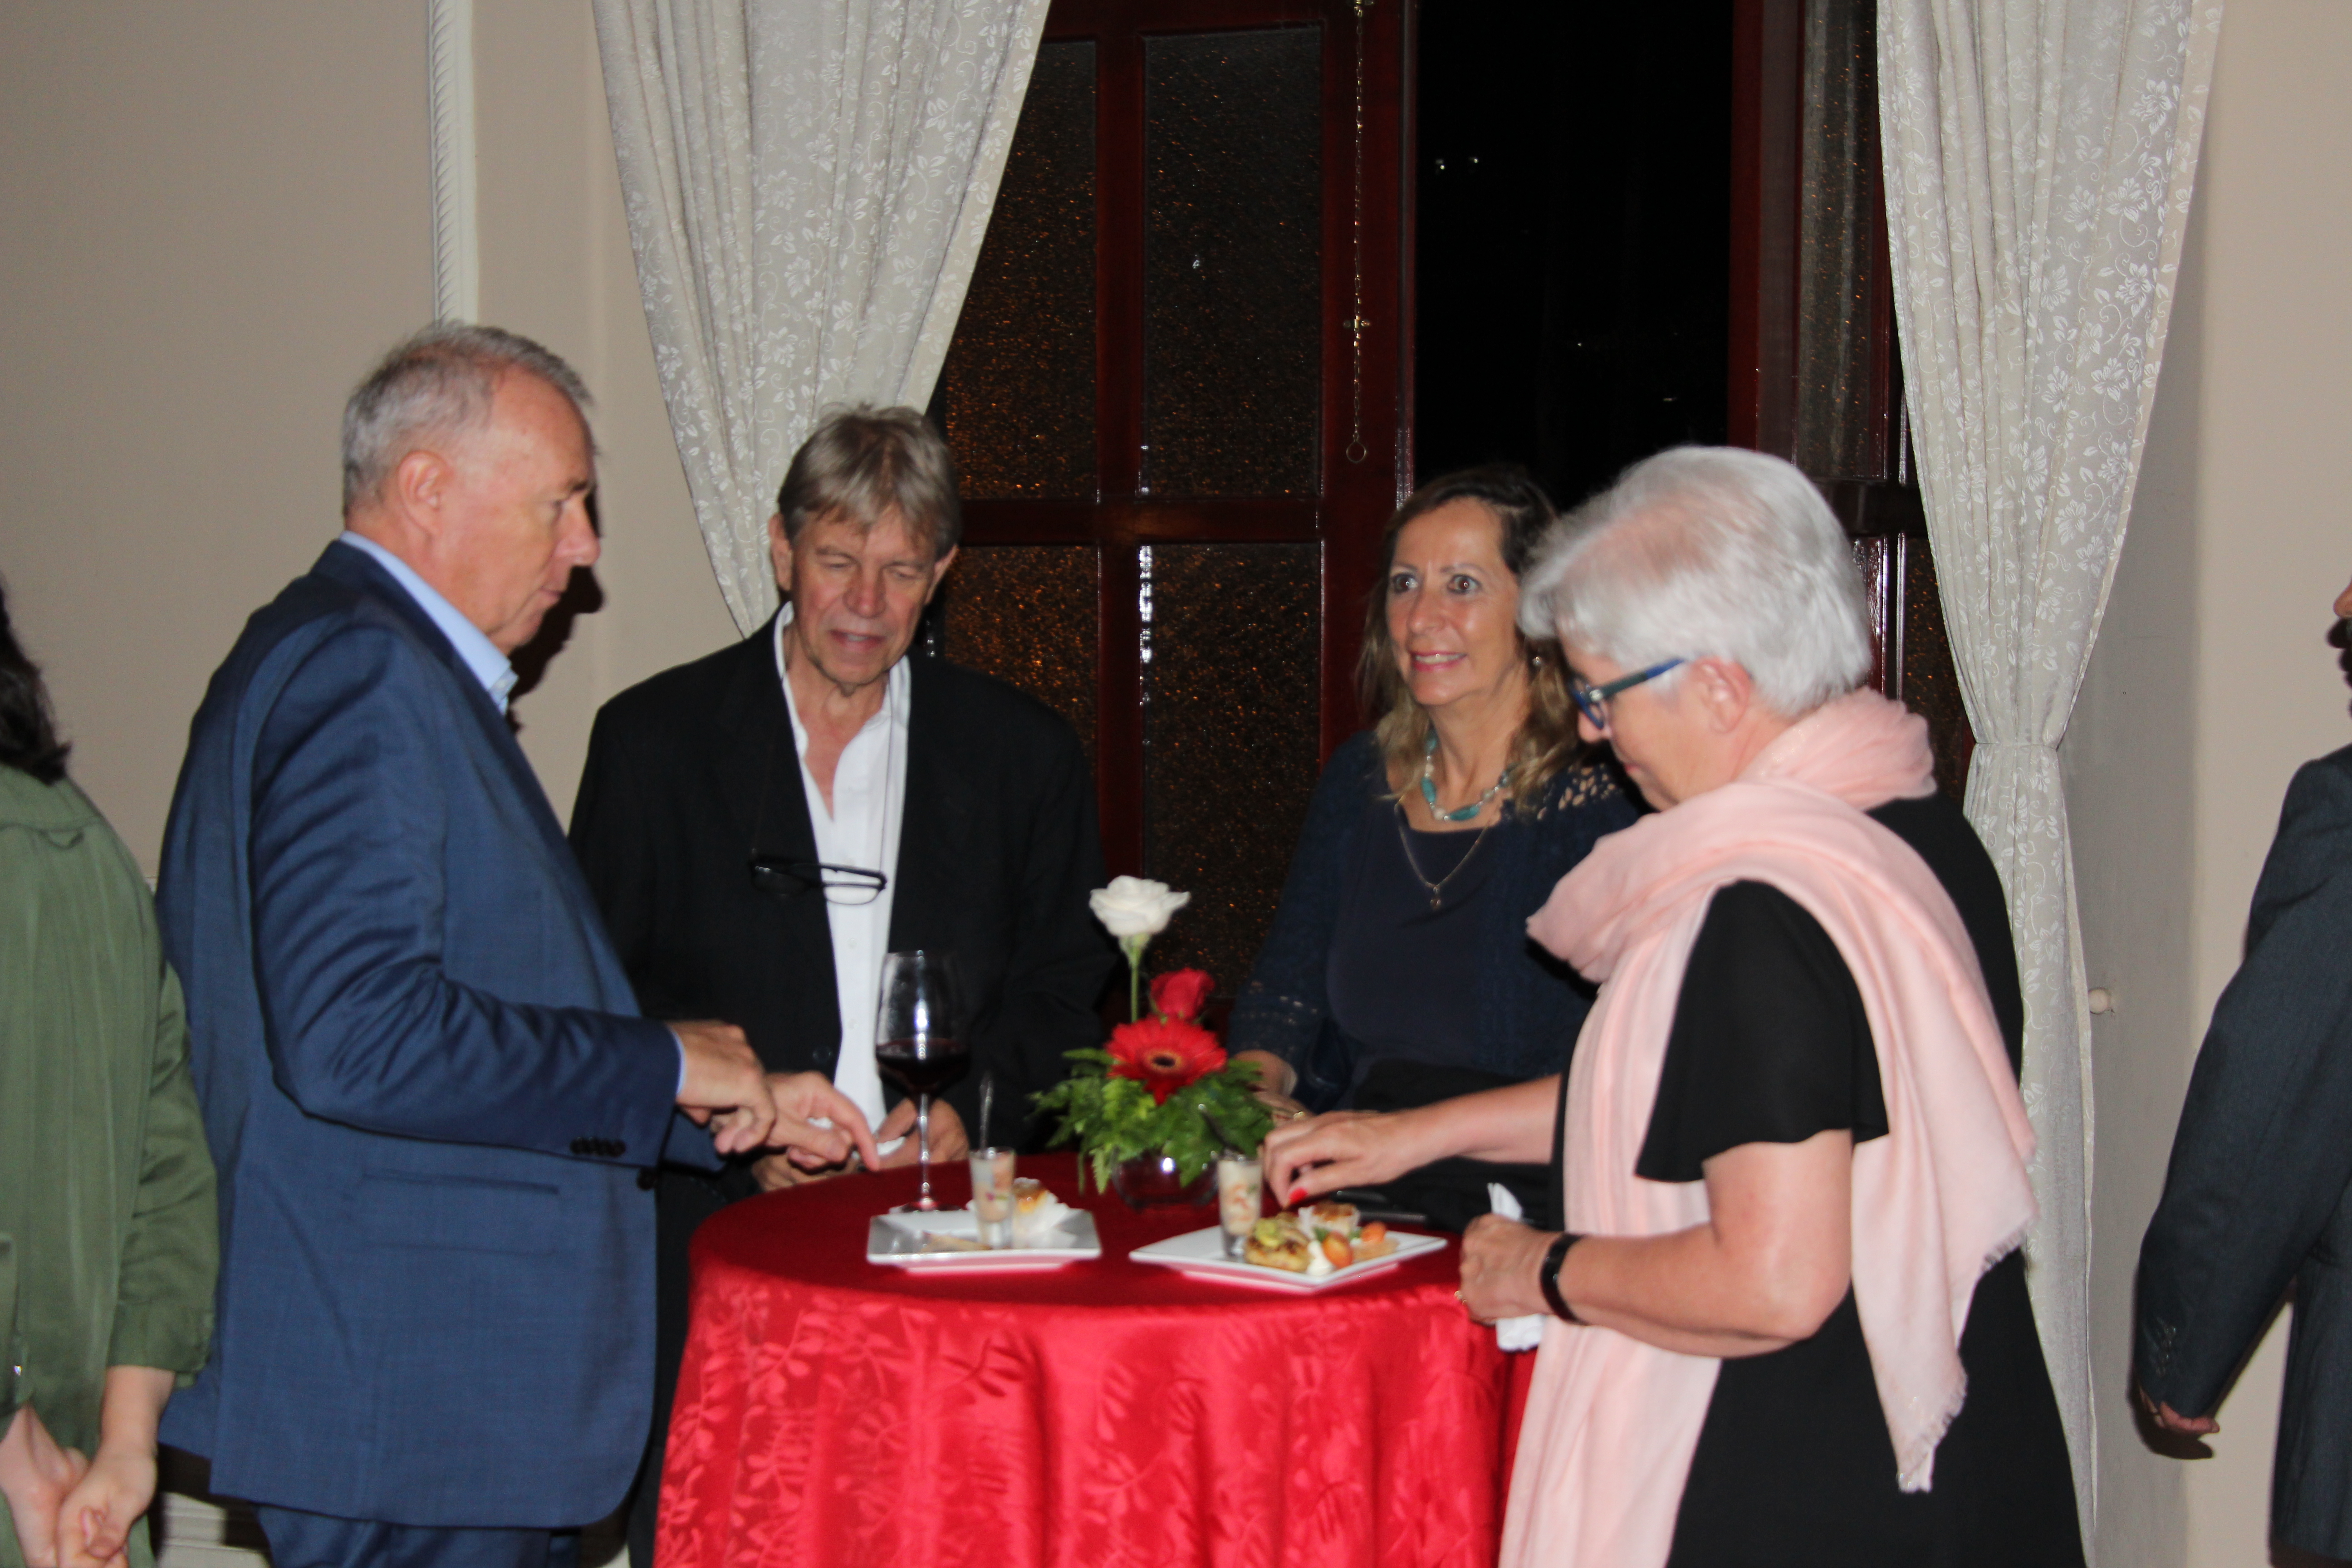 celebration of the 40th anniversary of Swiss cooperation in Honduras